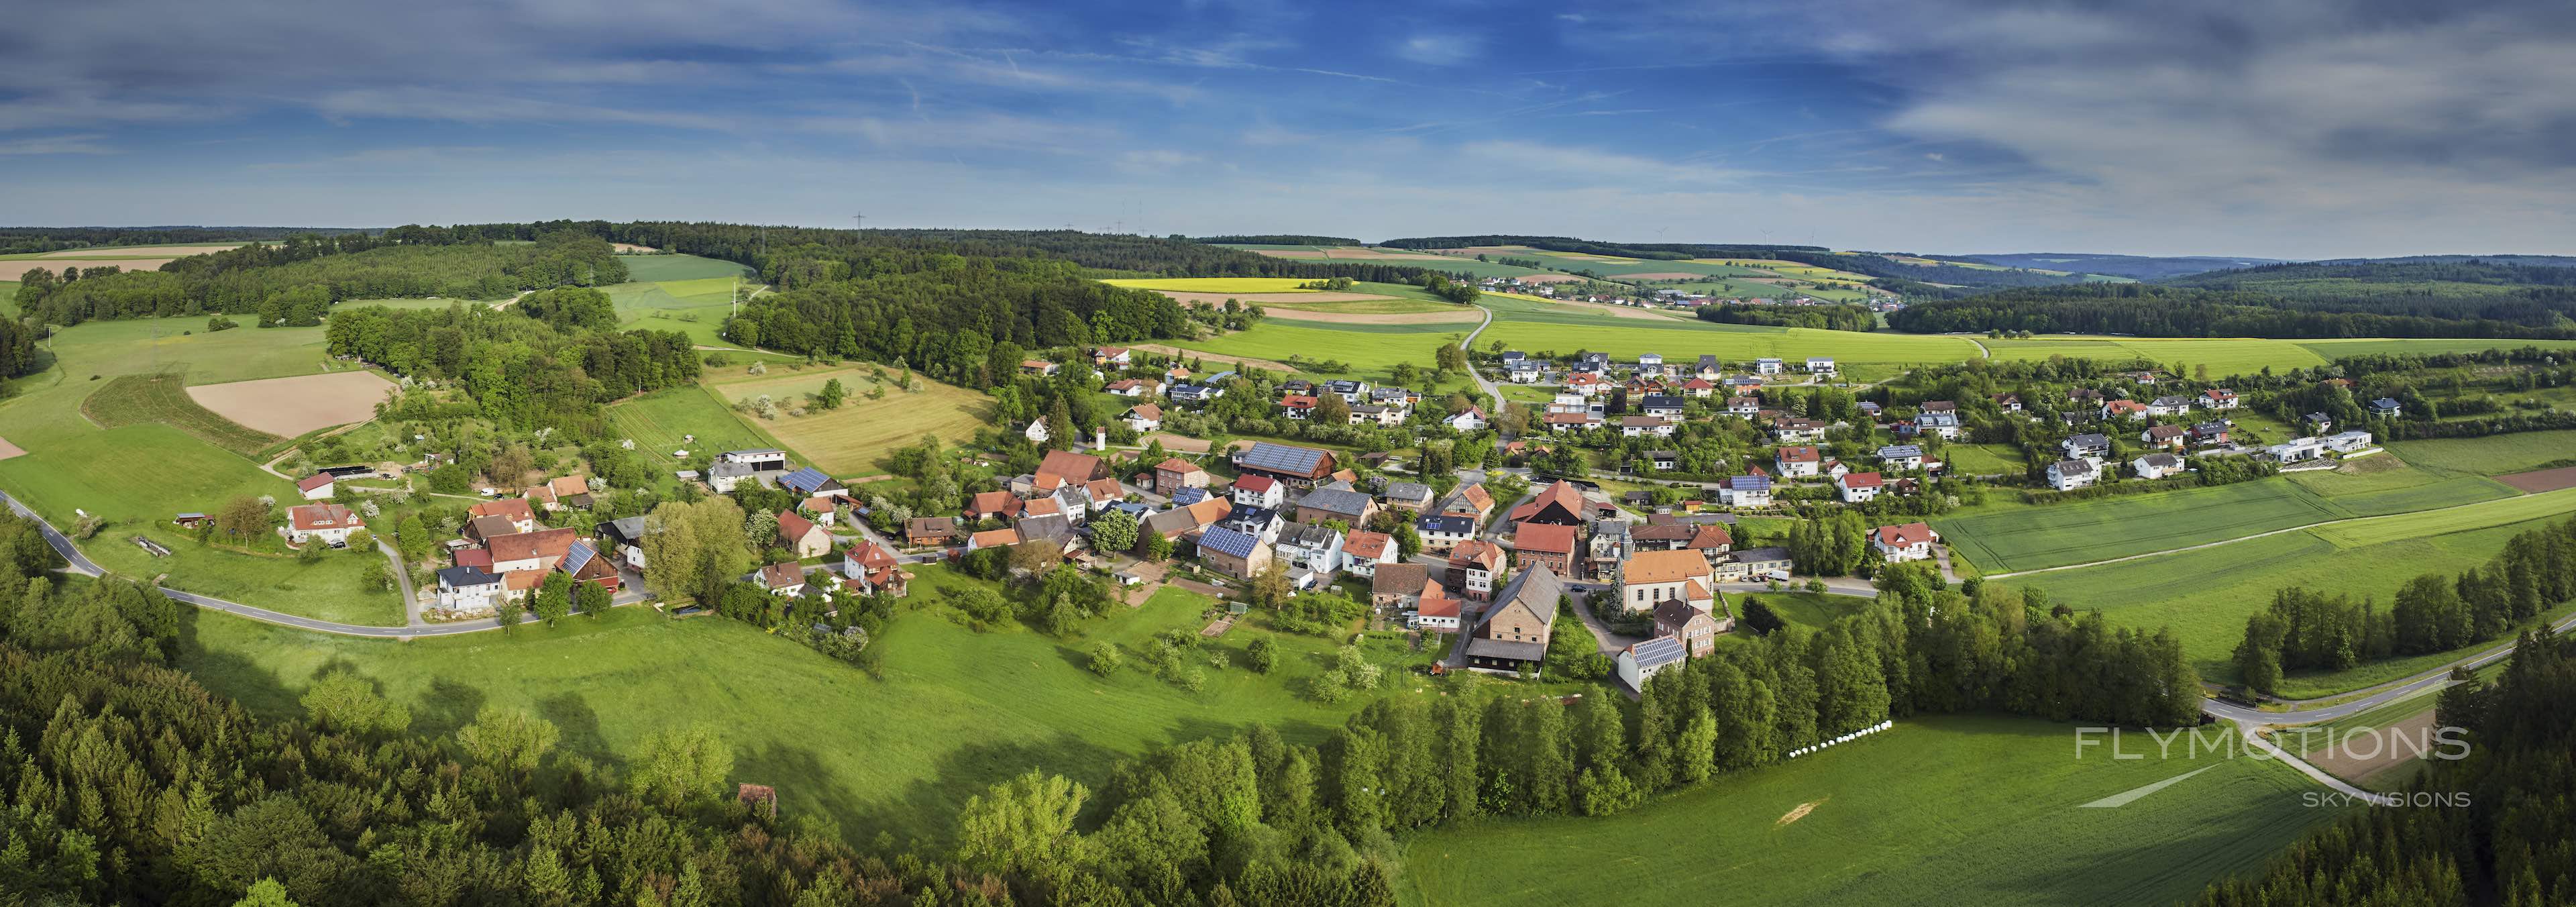 Buchen Odenwald after sunrise. Panoramic view. Drone.